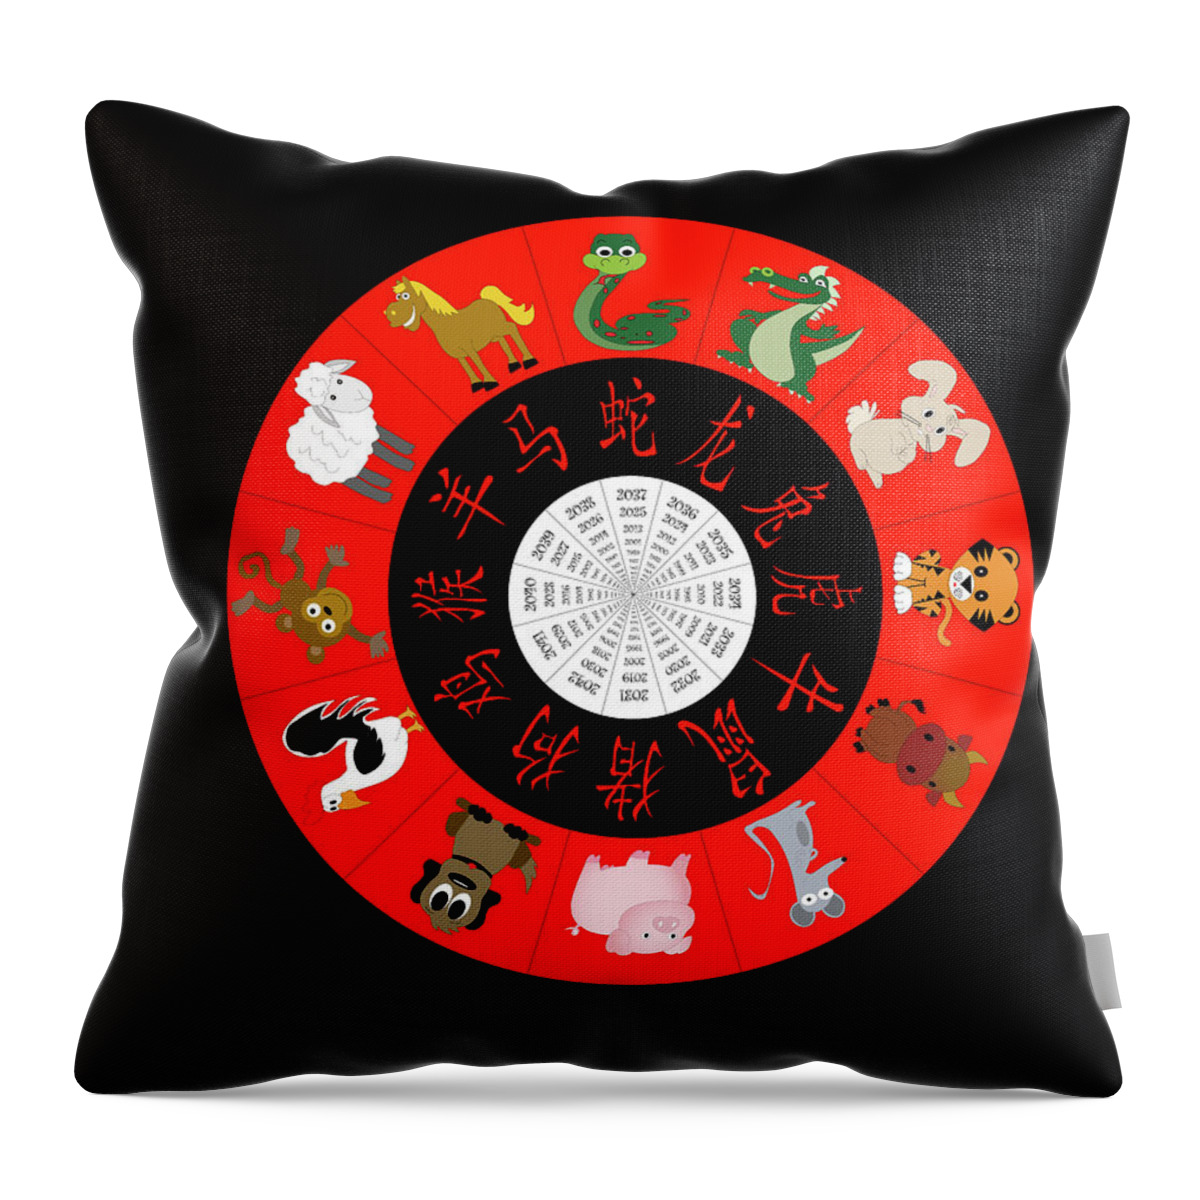  Throw Pillow featuring the photograph Chinese Zodiac by Karen Foley